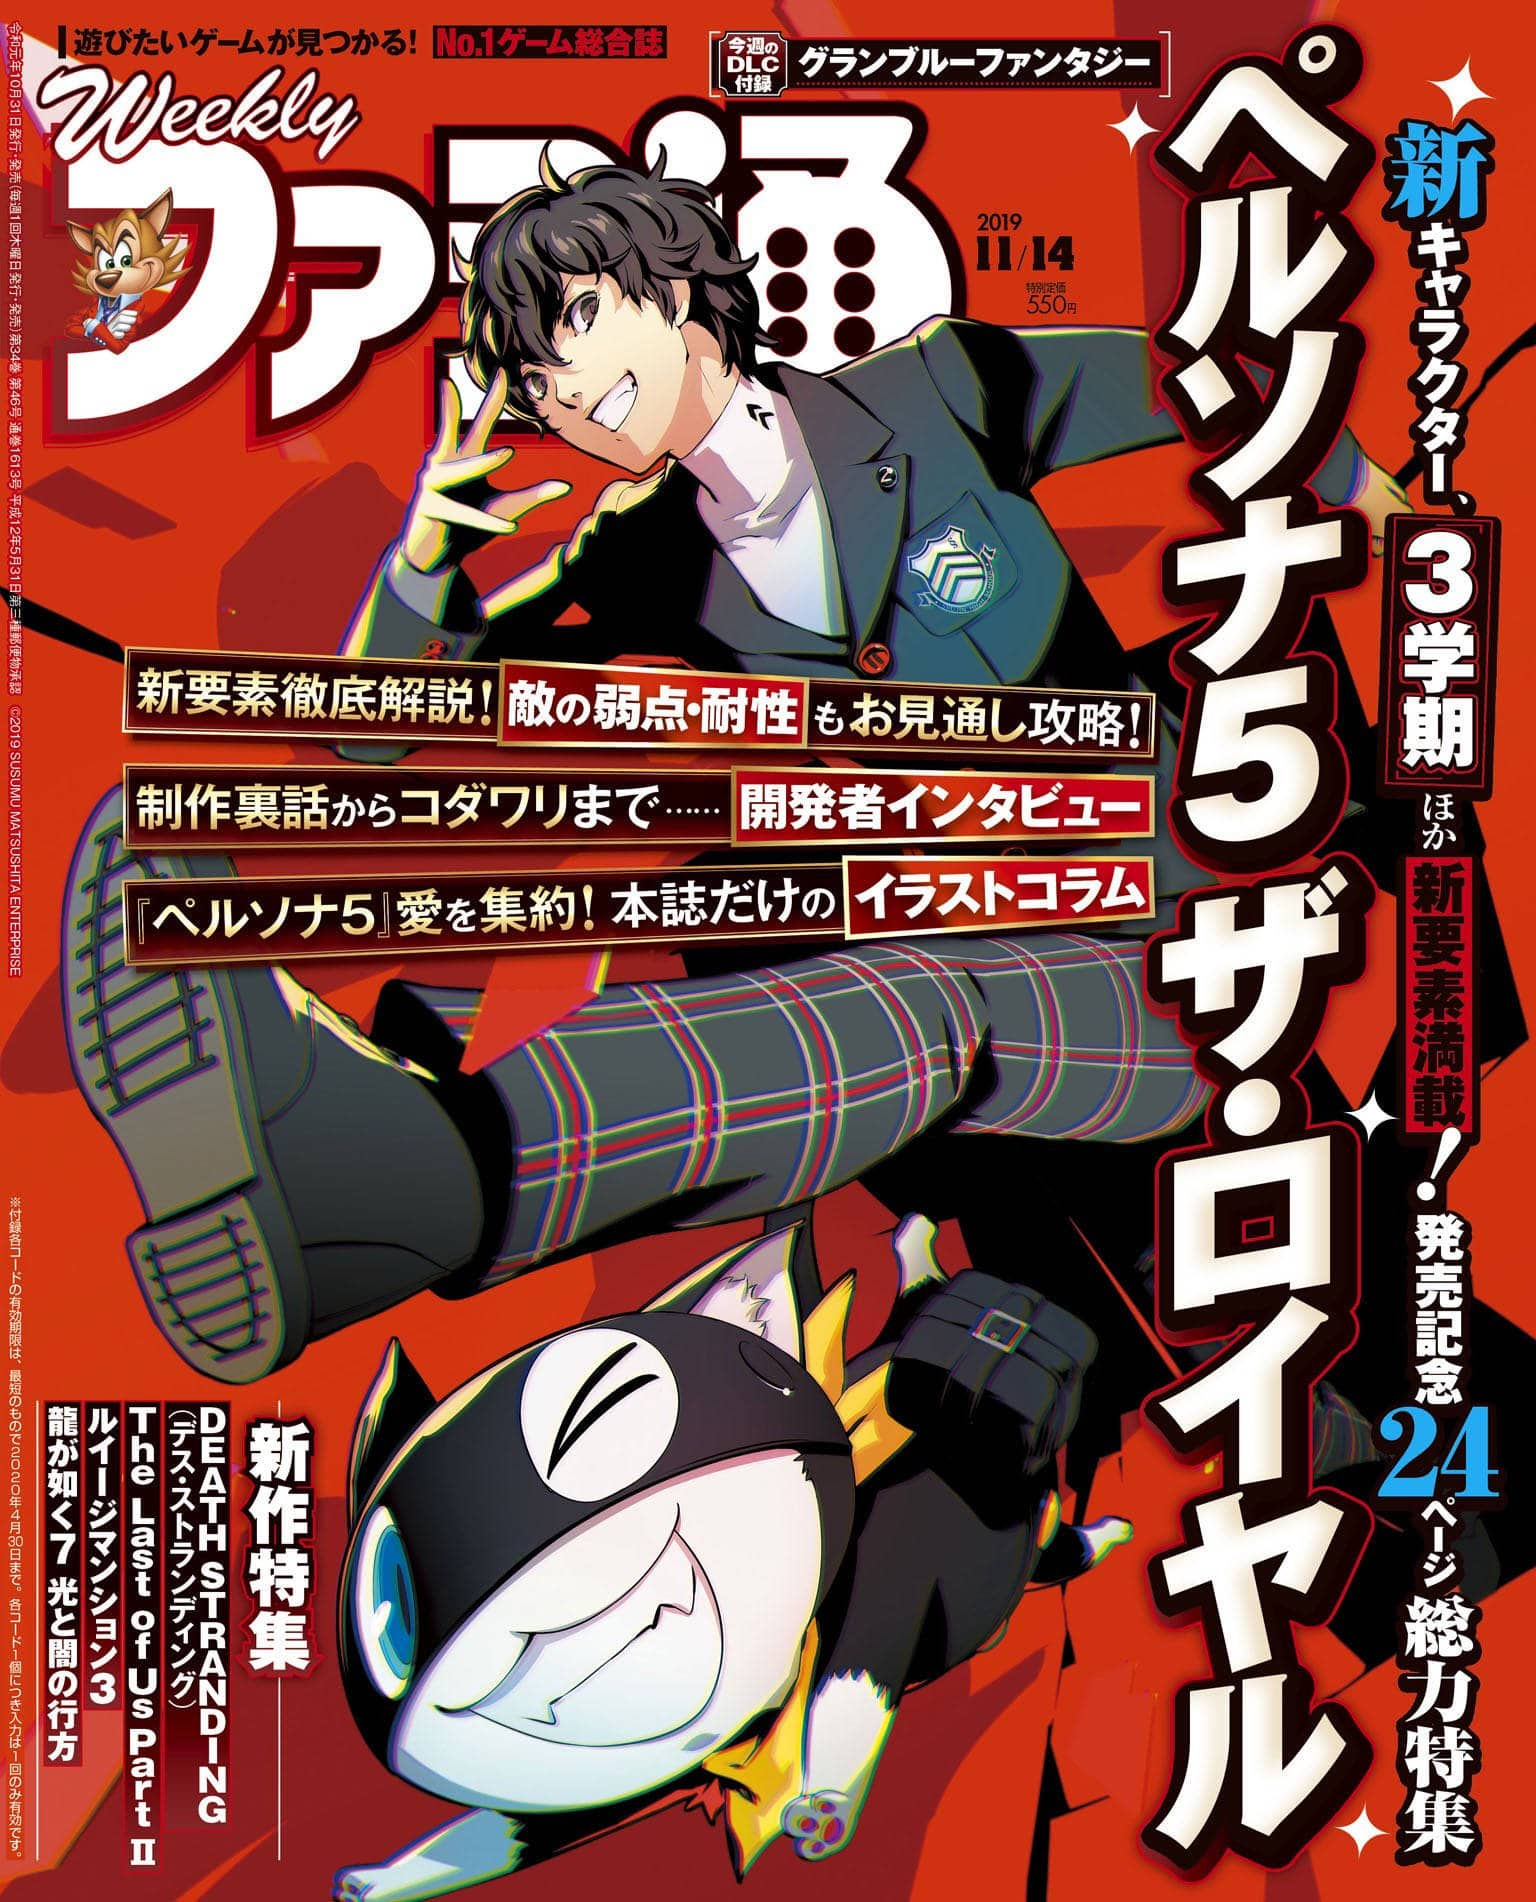 Persona 5 Royal Featured On Weekly Famitsu Magazine Issue